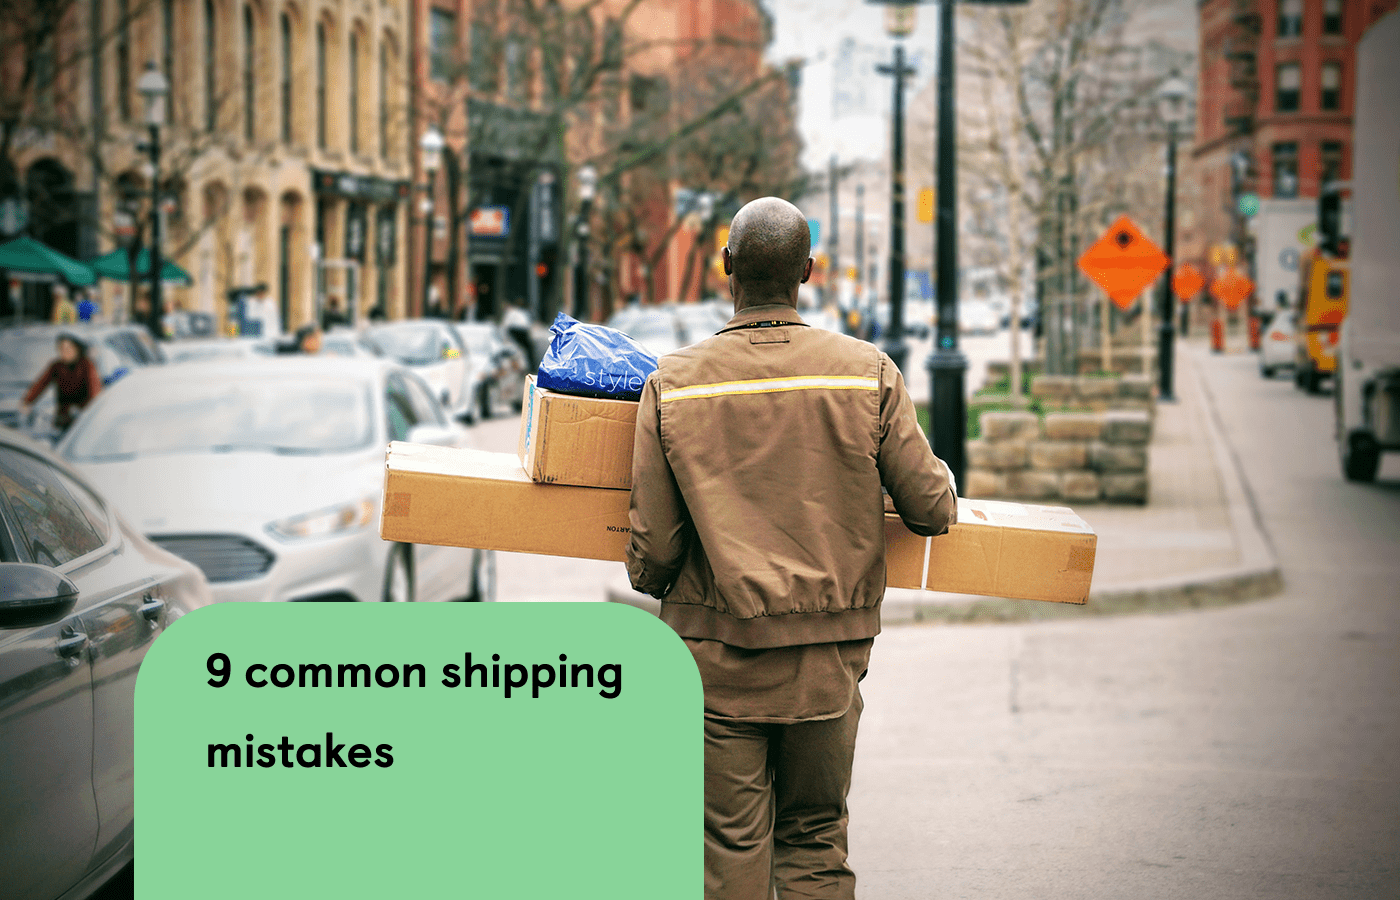 Shipping for Shopify retailers: 9 common shipping mistakes and how to avoid them